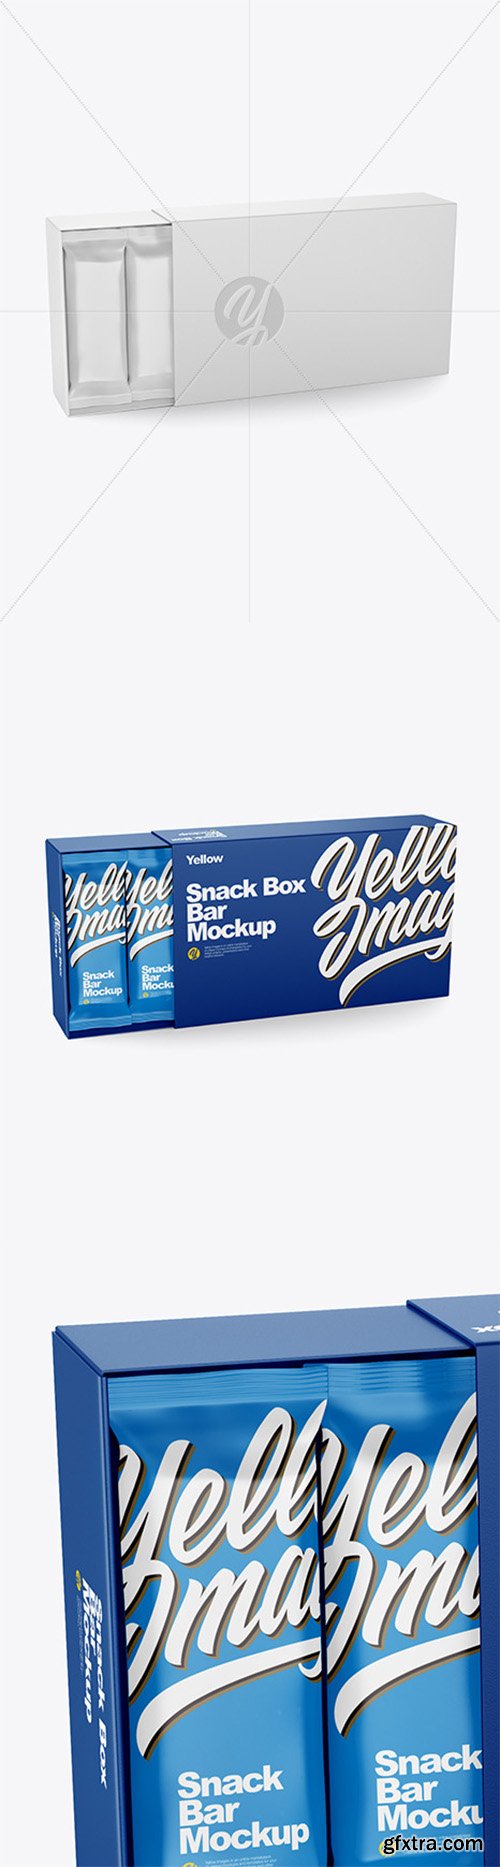 Paper Box with Snack Bars Mockup 64259